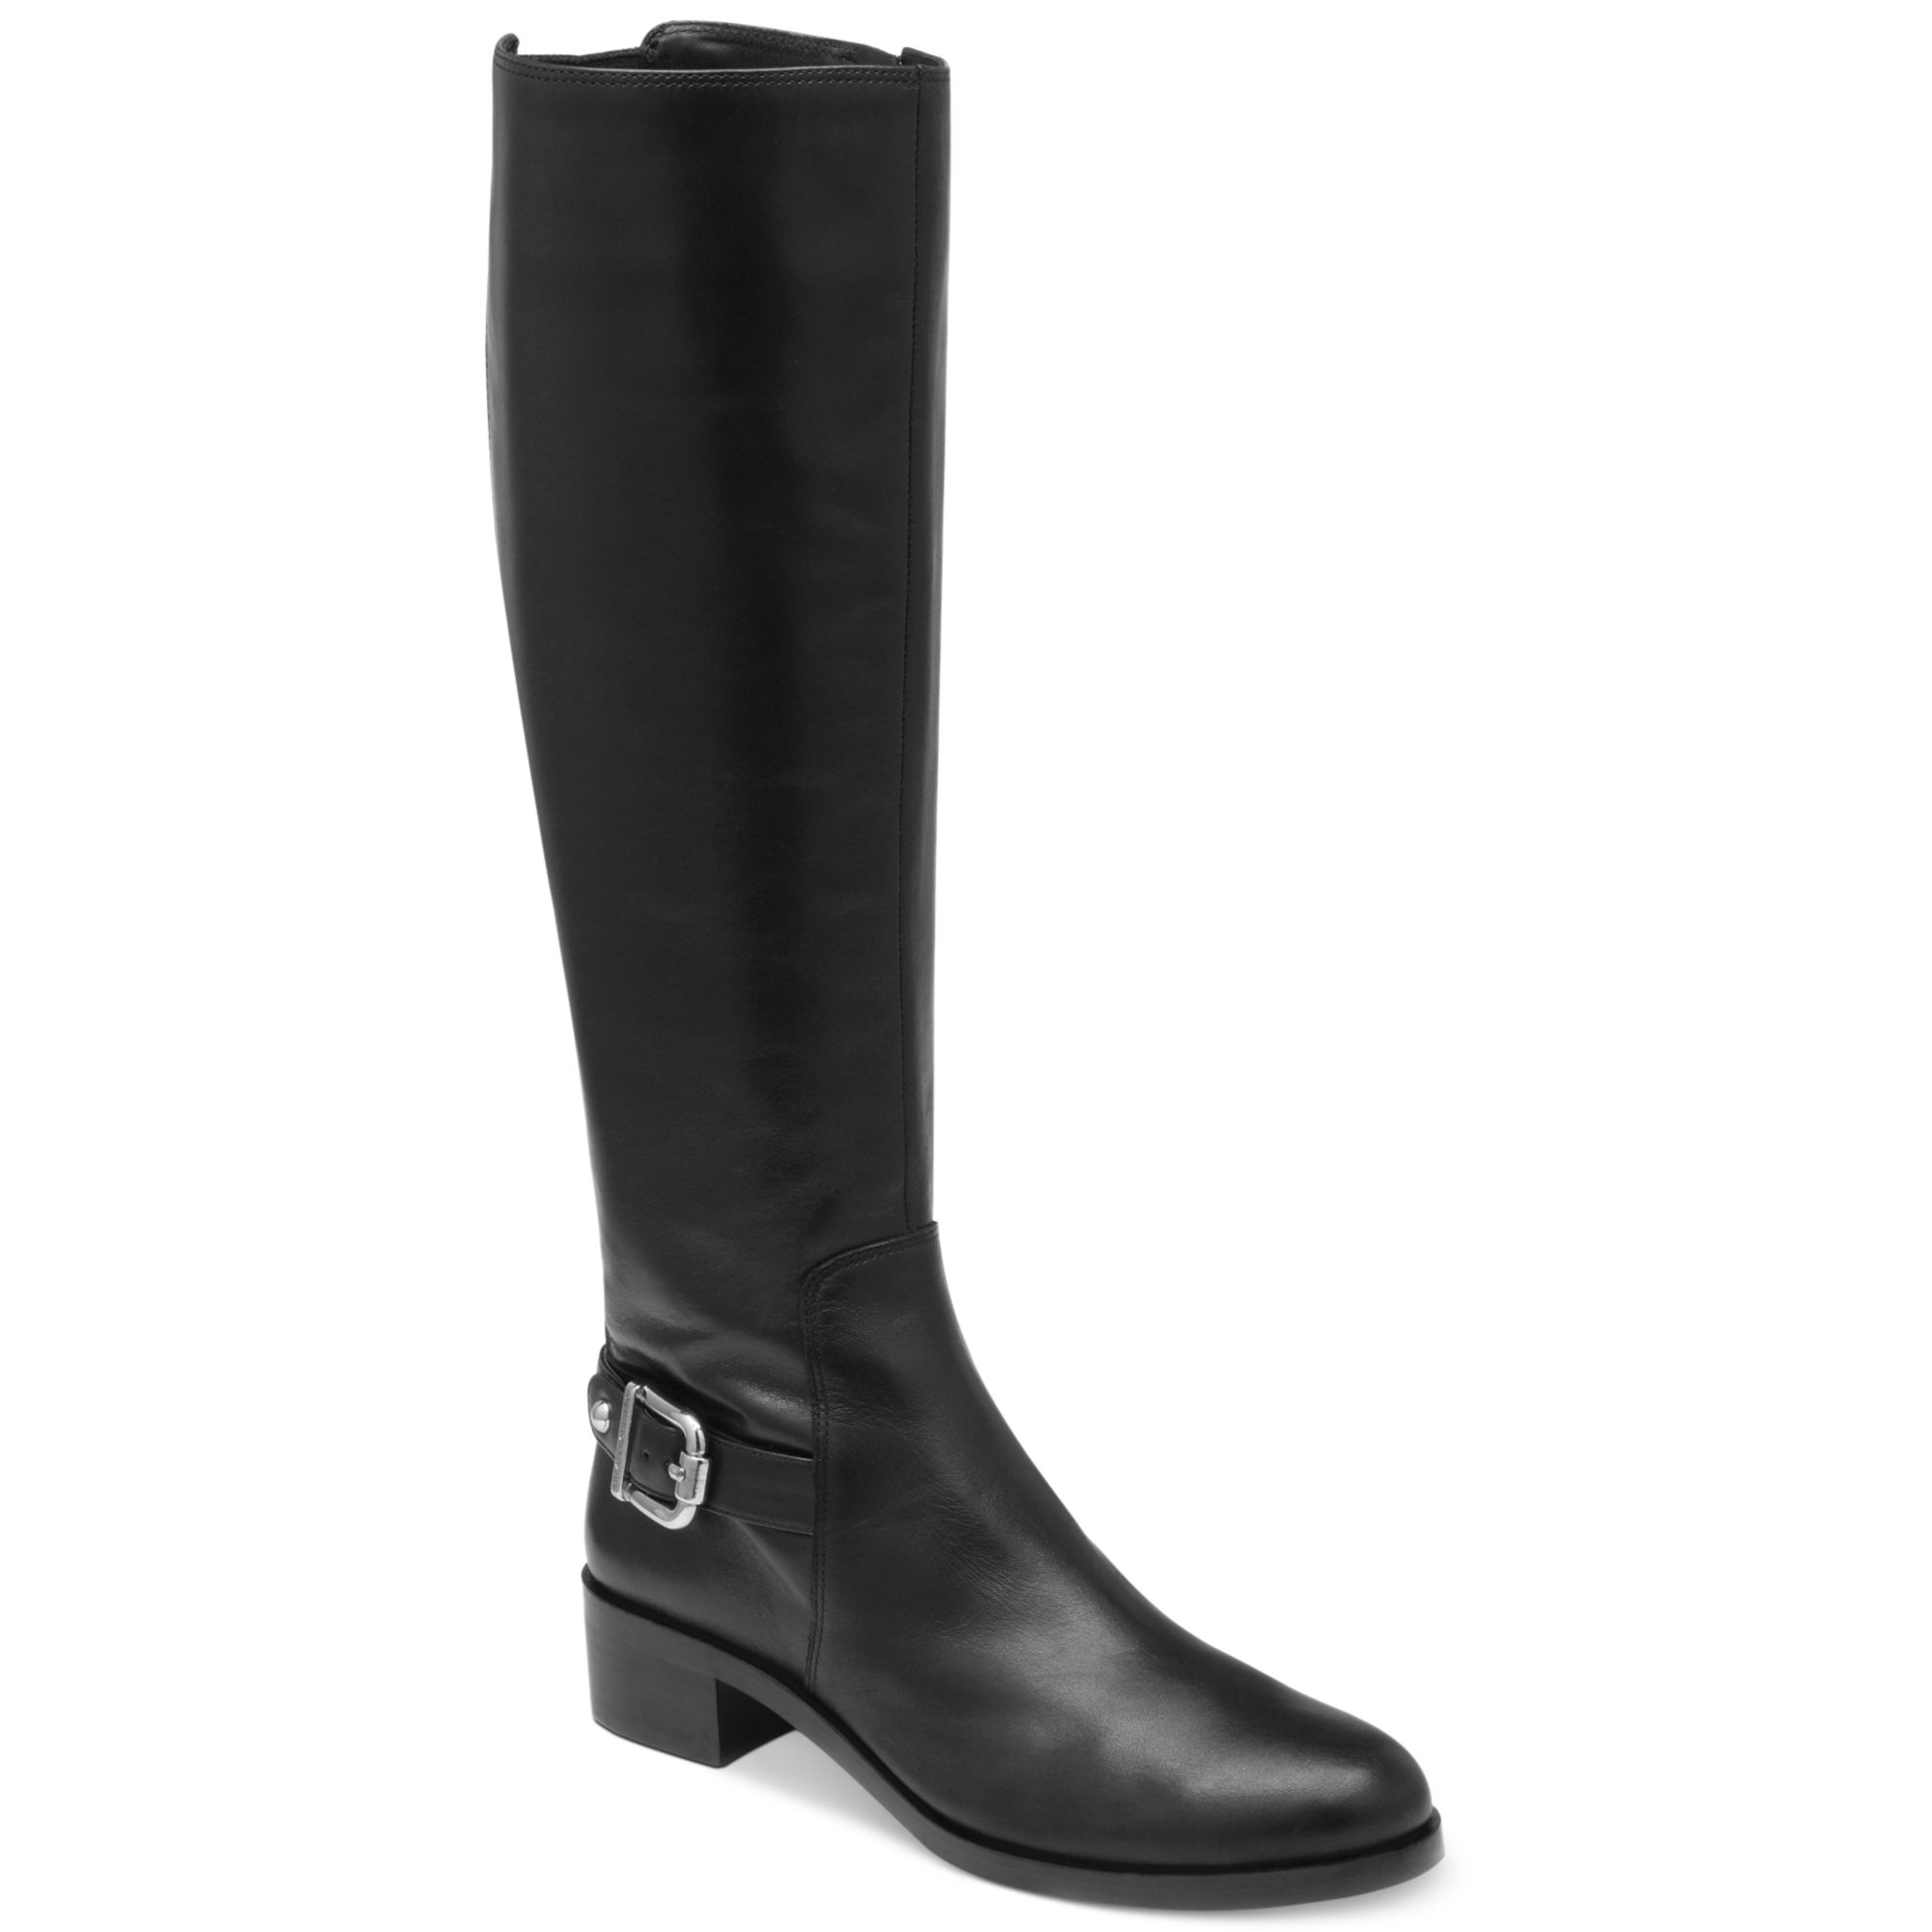 Vince camuto Vince Camuto Boots Volero Riding Boots in Black | Lyst